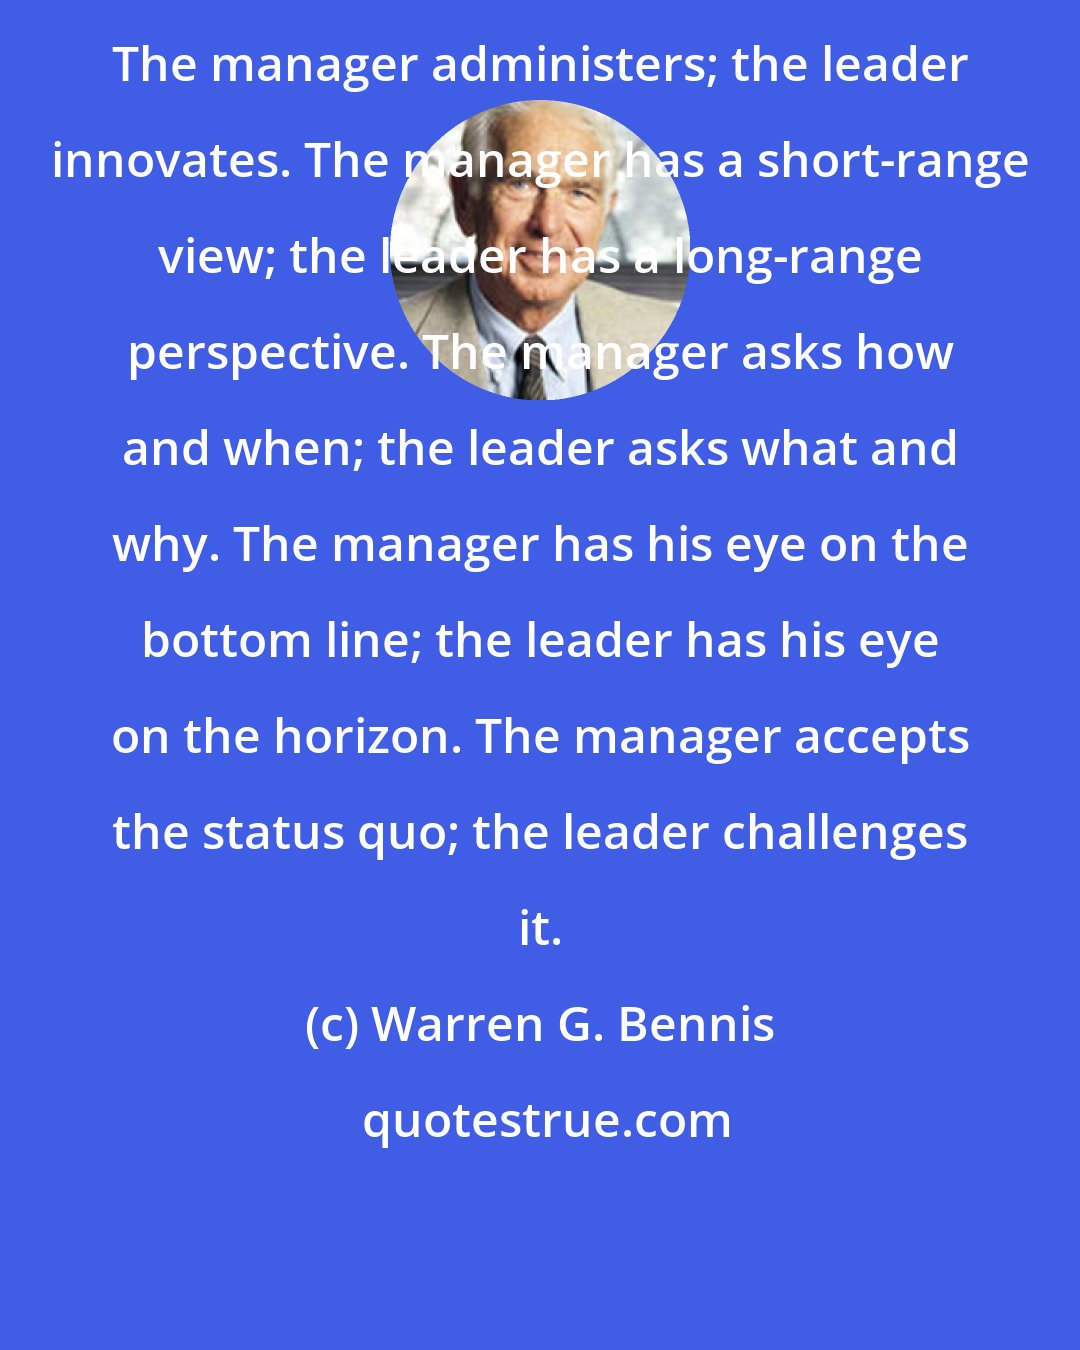 Warren G. Bennis: The manager administers; the leader innovates. The manager has a short-range view; the leader has a long-range perspective. The manager asks how and when; the leader asks what and why. The manager has his eye on the bottom line; the leader has his eye on the horizon. The manager accepts the status quo; the leader challenges it.